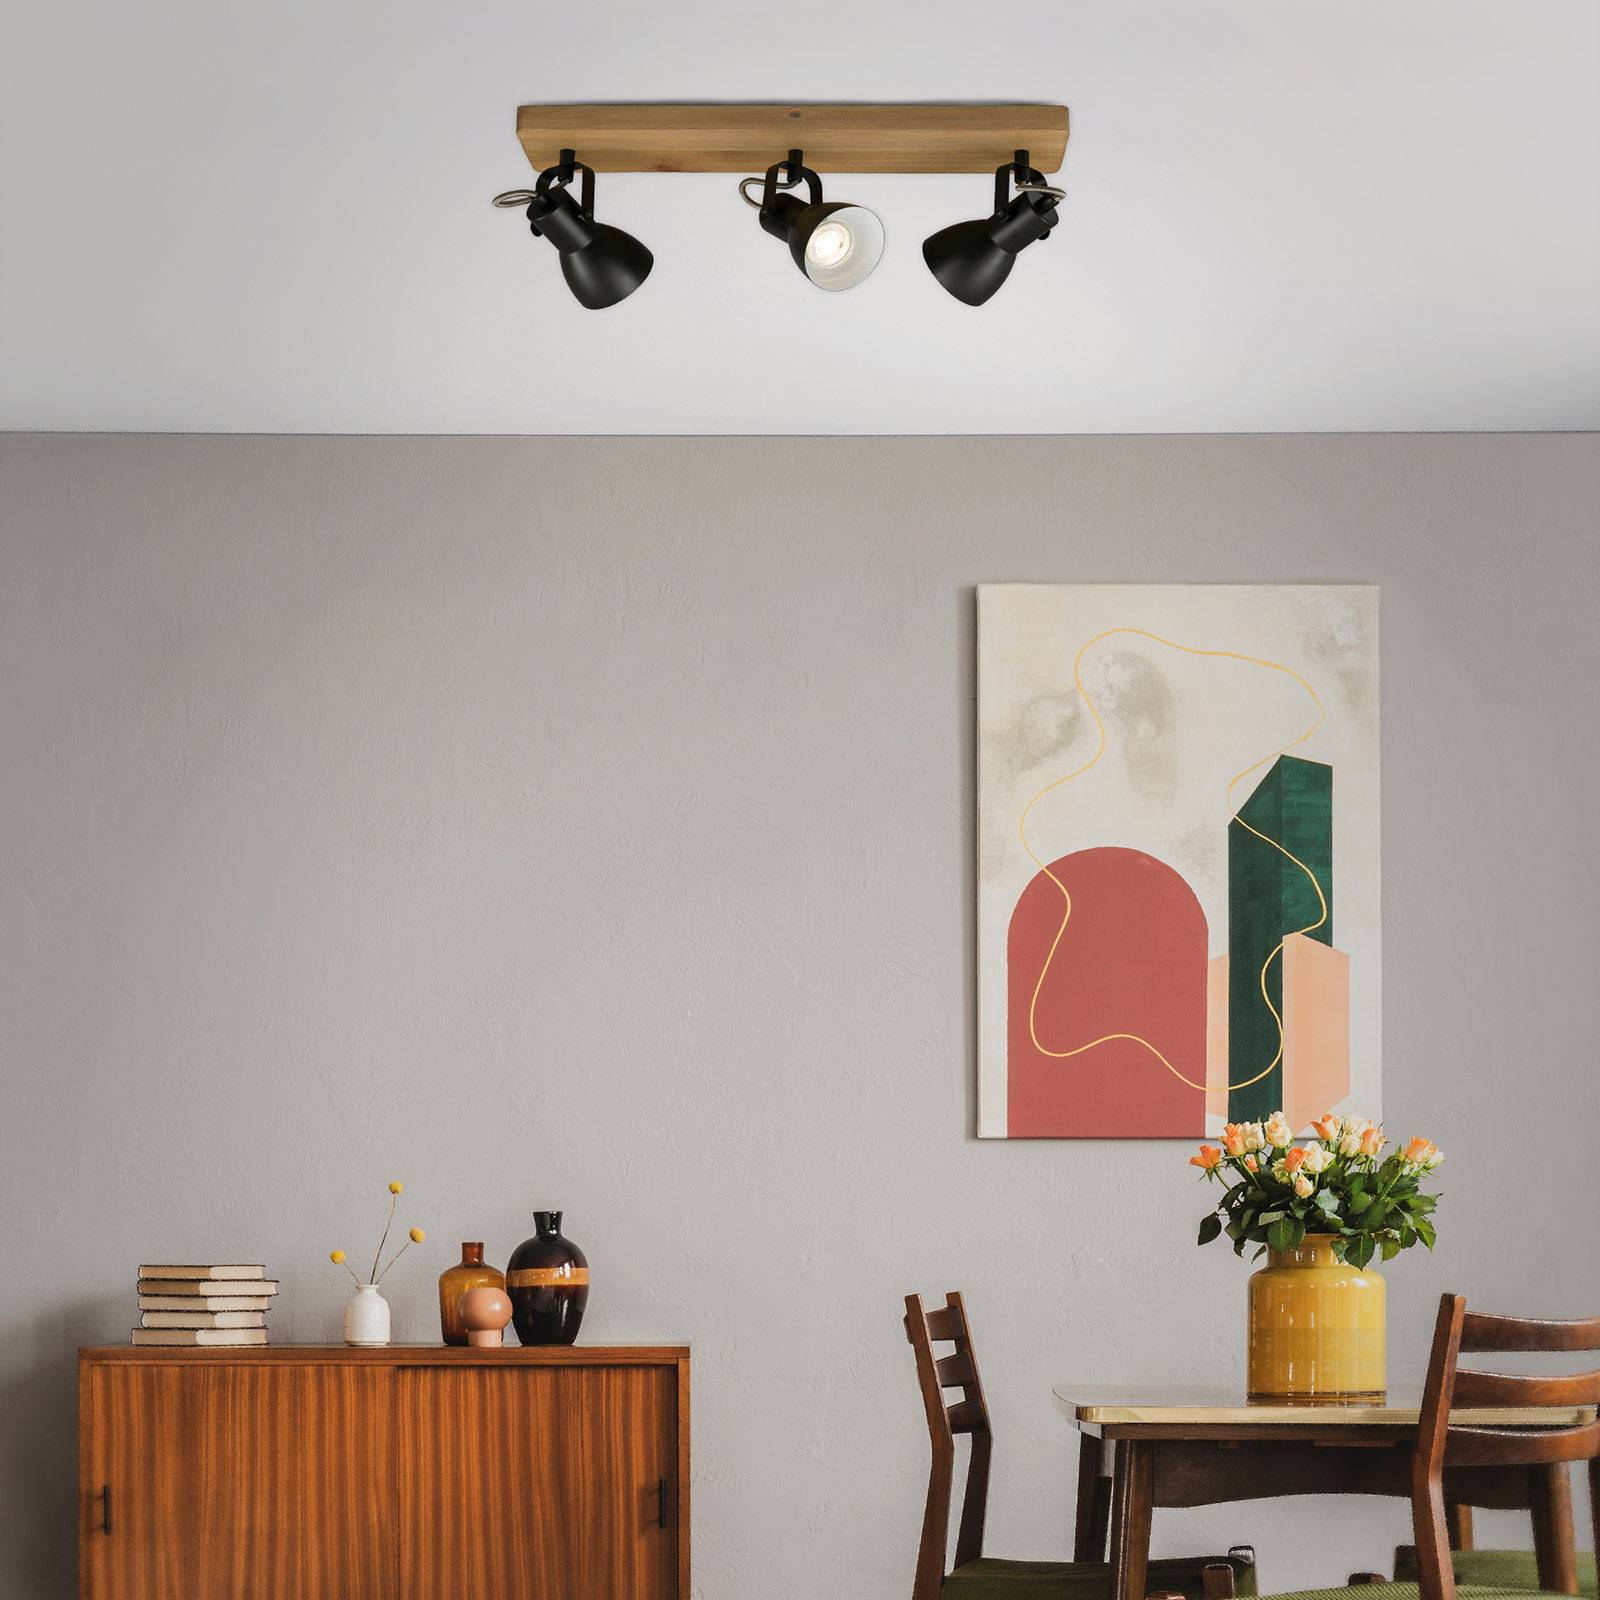 Photos - Chandelier / Lamp Briloner Arbo downlight with wooden element, 3-bulb 